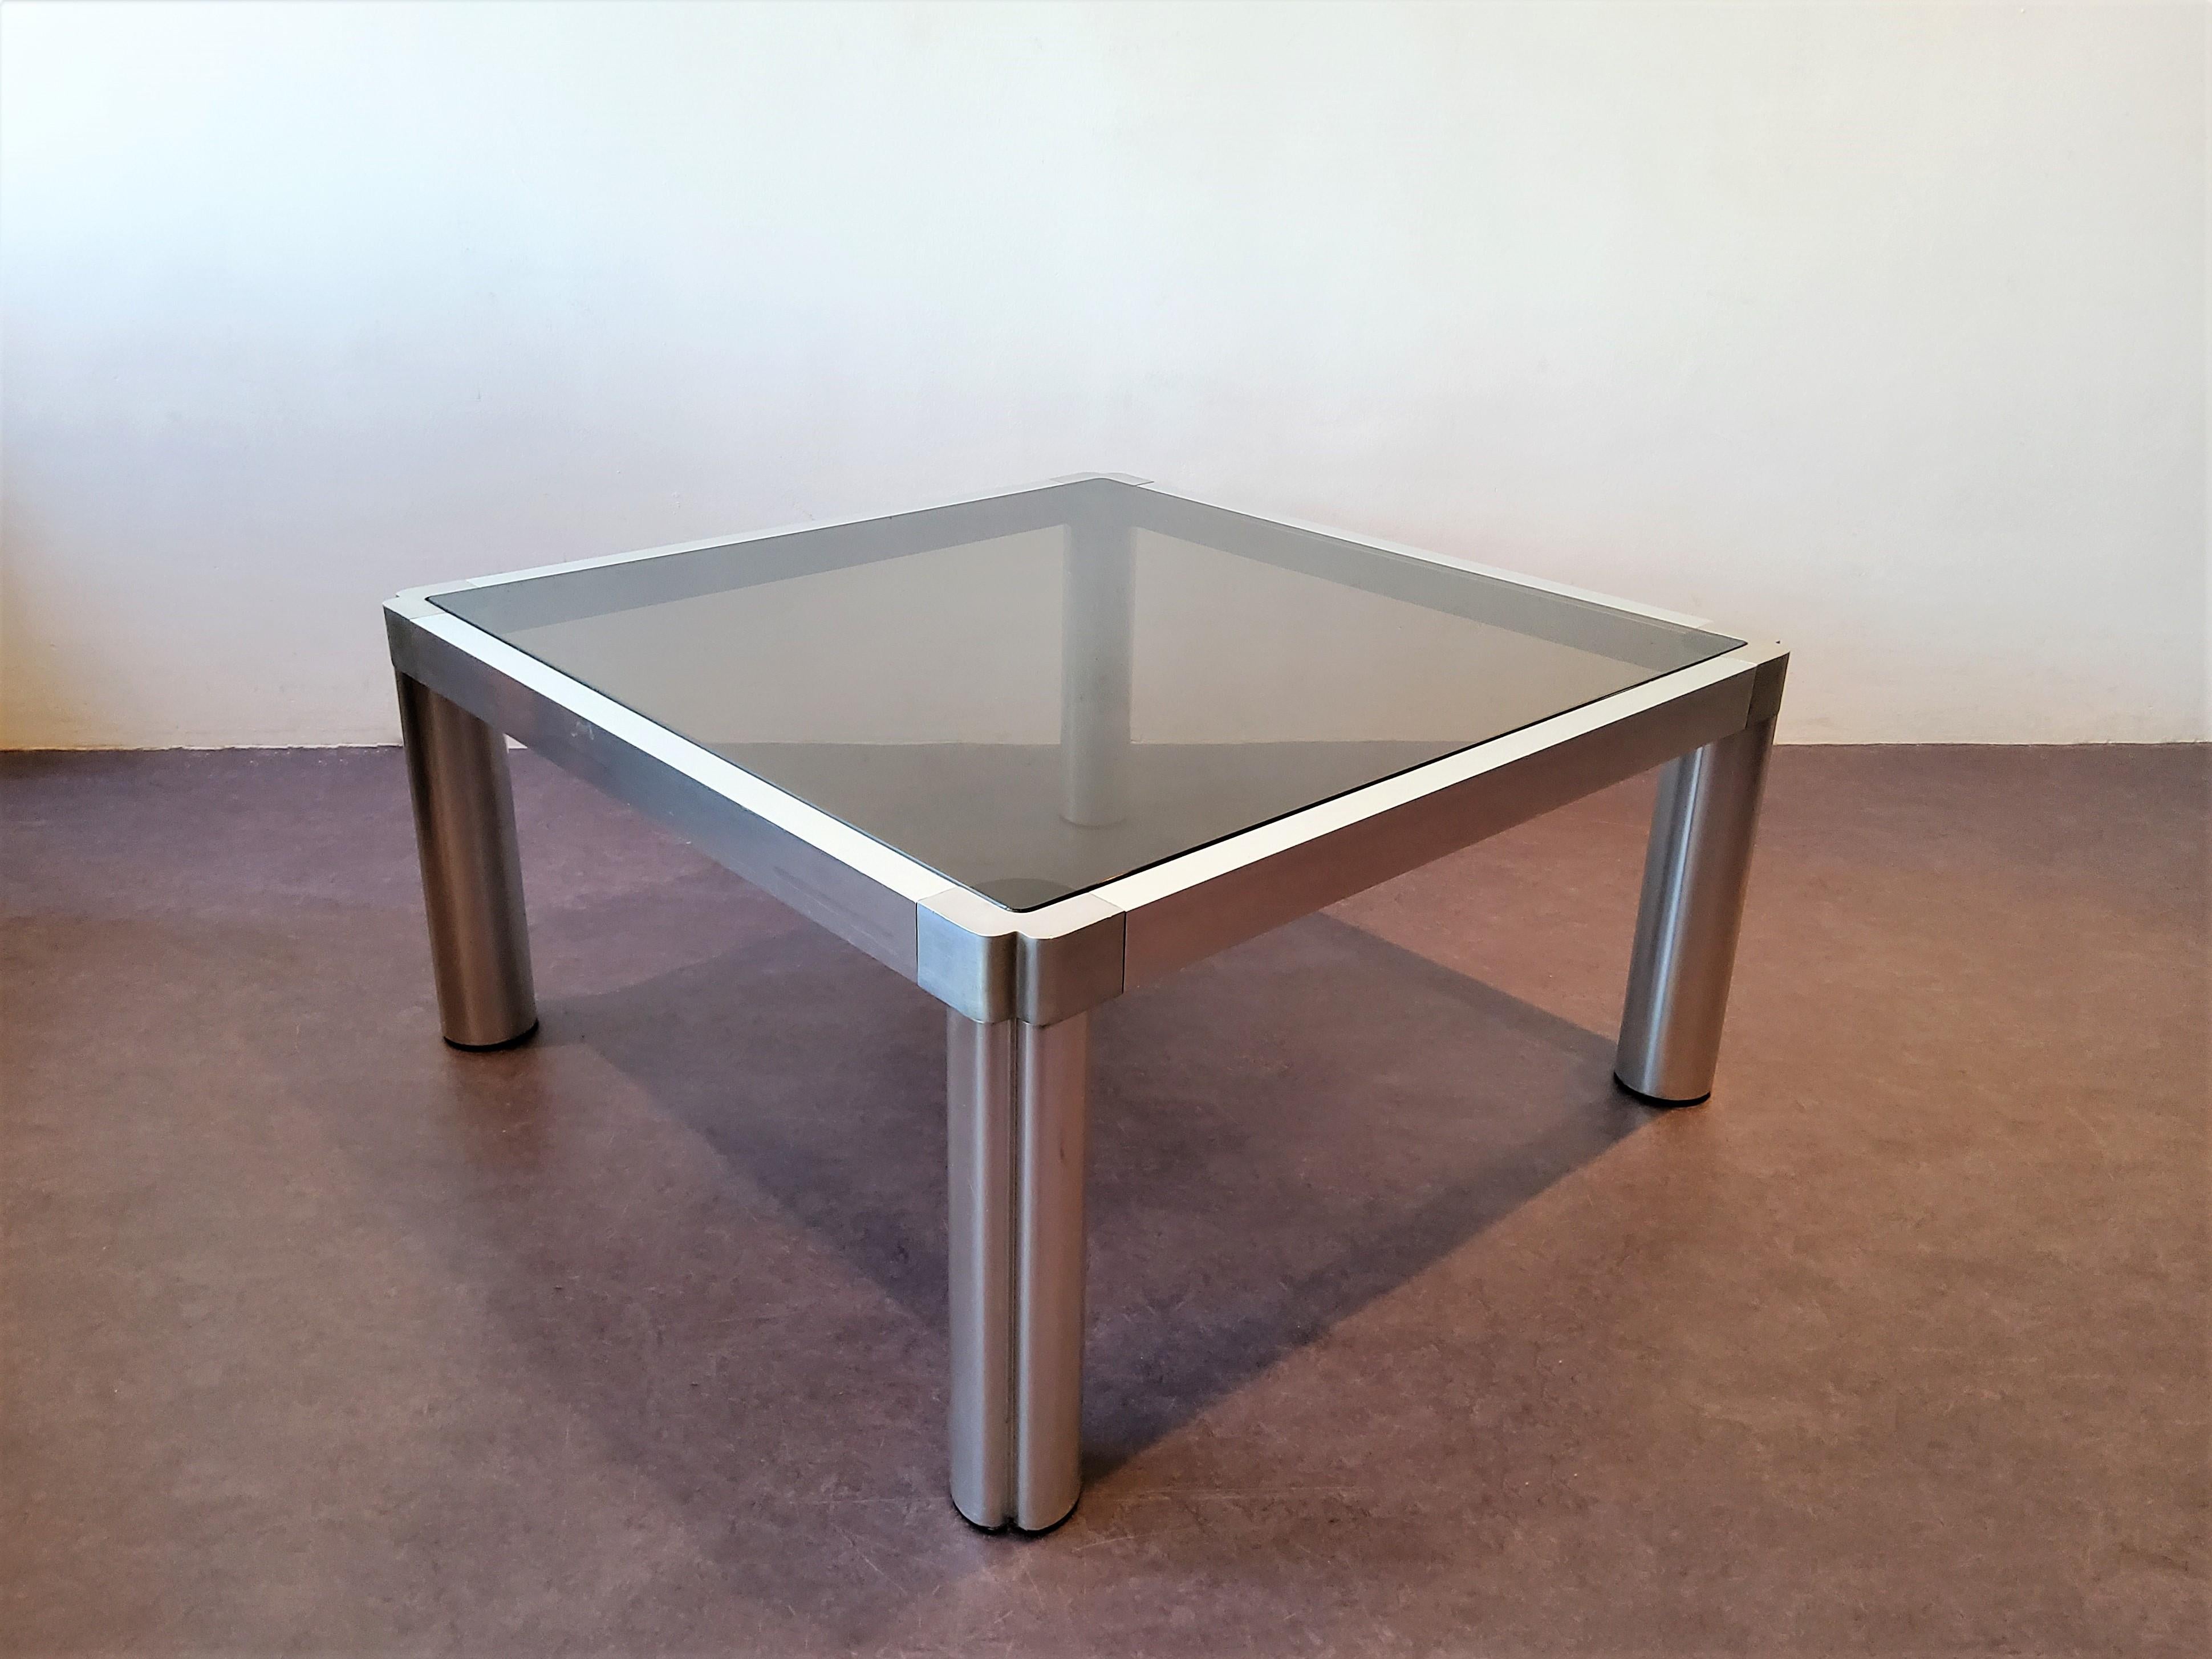 This coffee table, model 100, was designed by Kho Liang Ie for Artifort in 1974. It has an extruded and andonized aluminum base with a smoked glass top. This table is in a very good condition, with minor signs of age and use and some small scratches